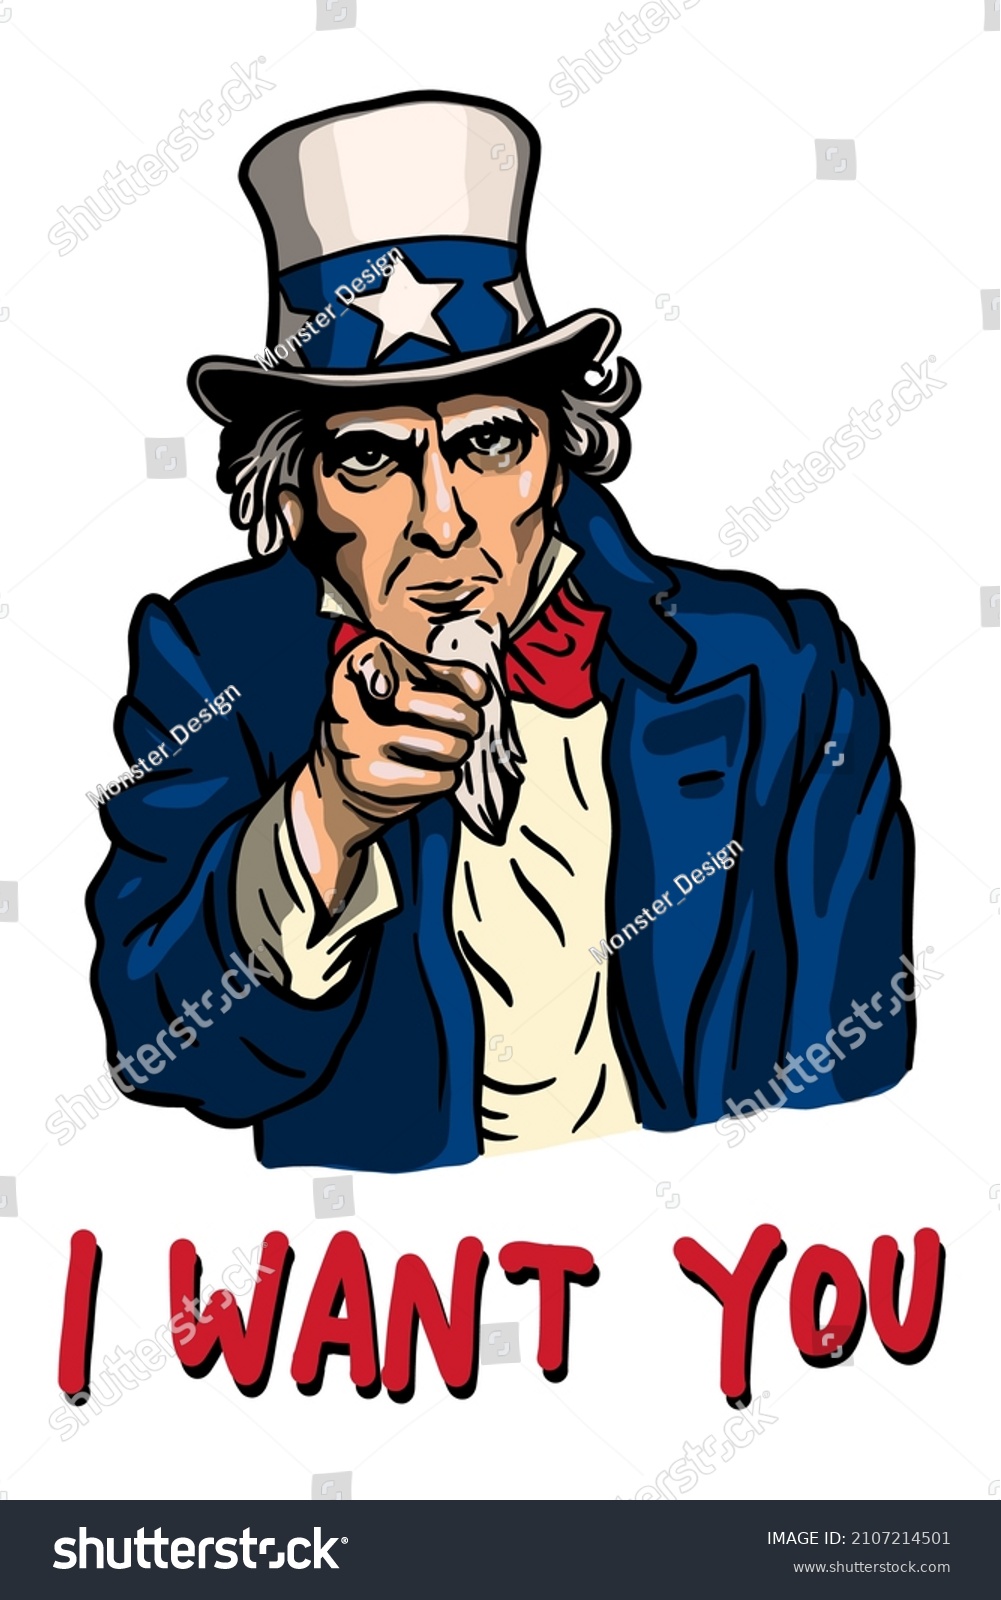 Uncle Sam Vector Illustration With Pointing Hand Royalty Free Stock Vector Avopix Com